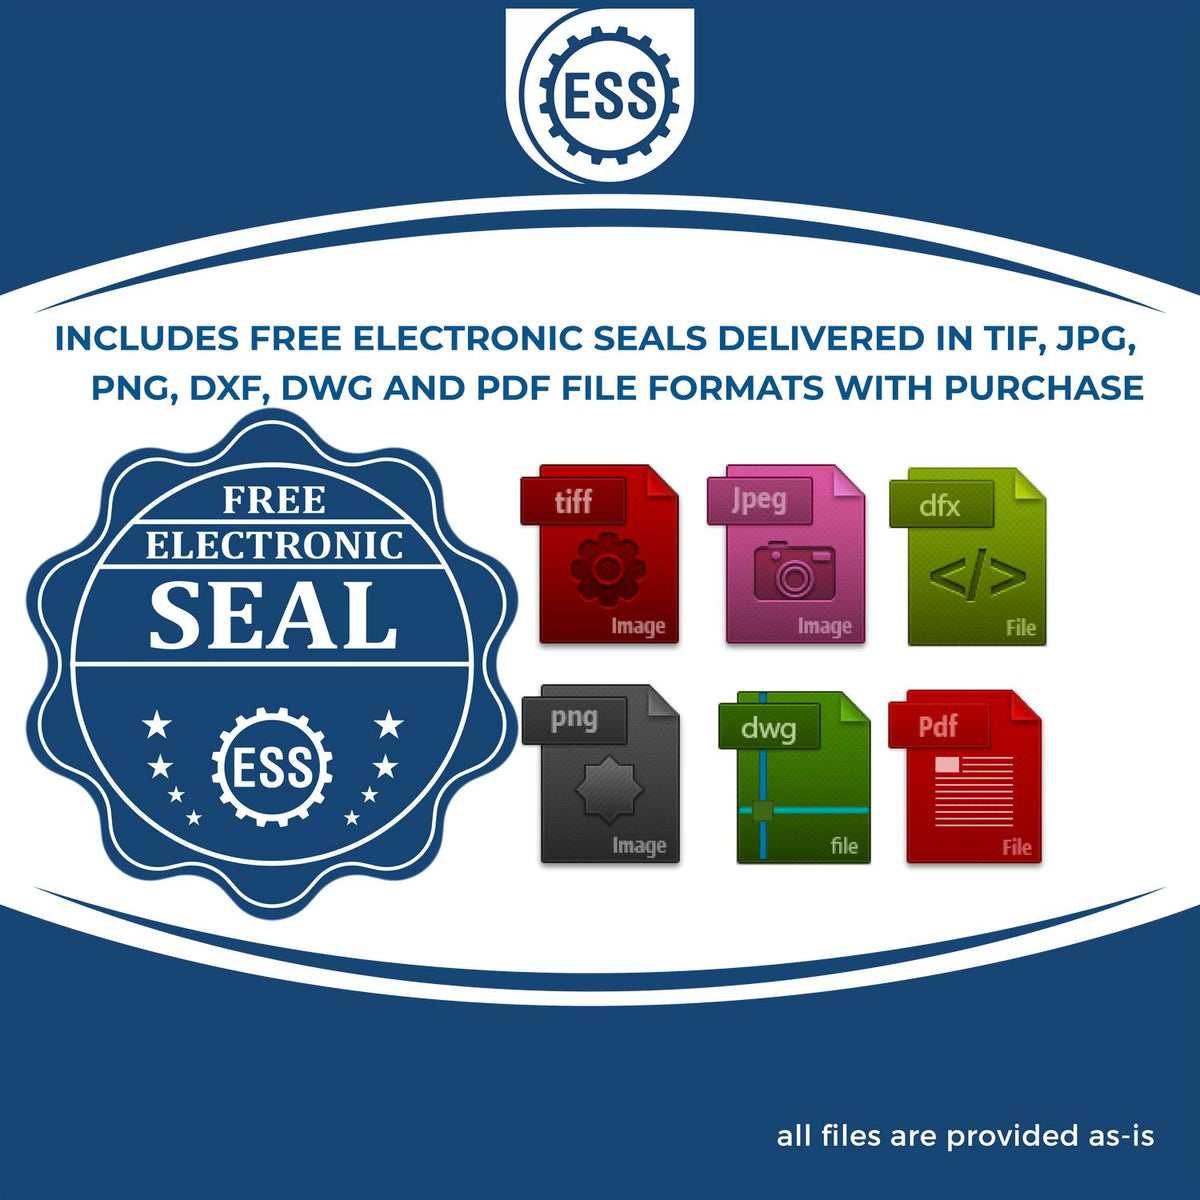 An infographic for the free electronic seal for the Self-Inking Idaho Geologist Stamp illustrating the different file type icons such as DXF, DWG, TIF, JPG and PNG.